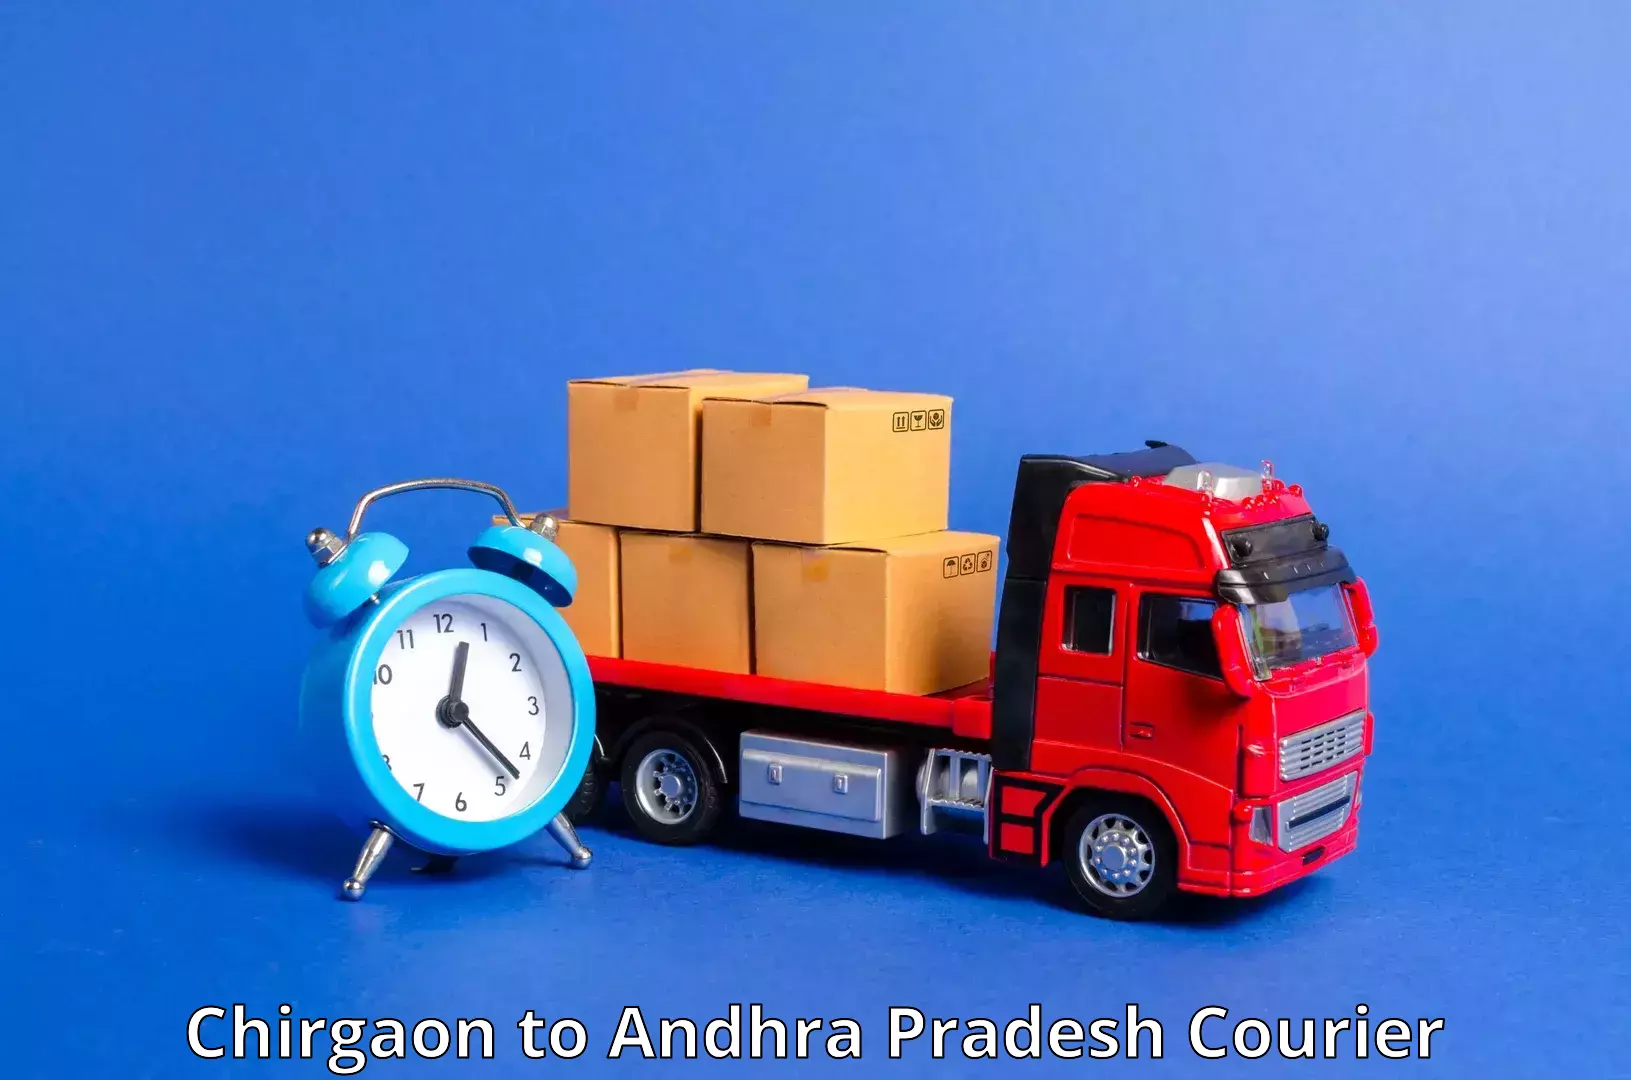 Fast delivery service Chirgaon to Andhra Pradesh